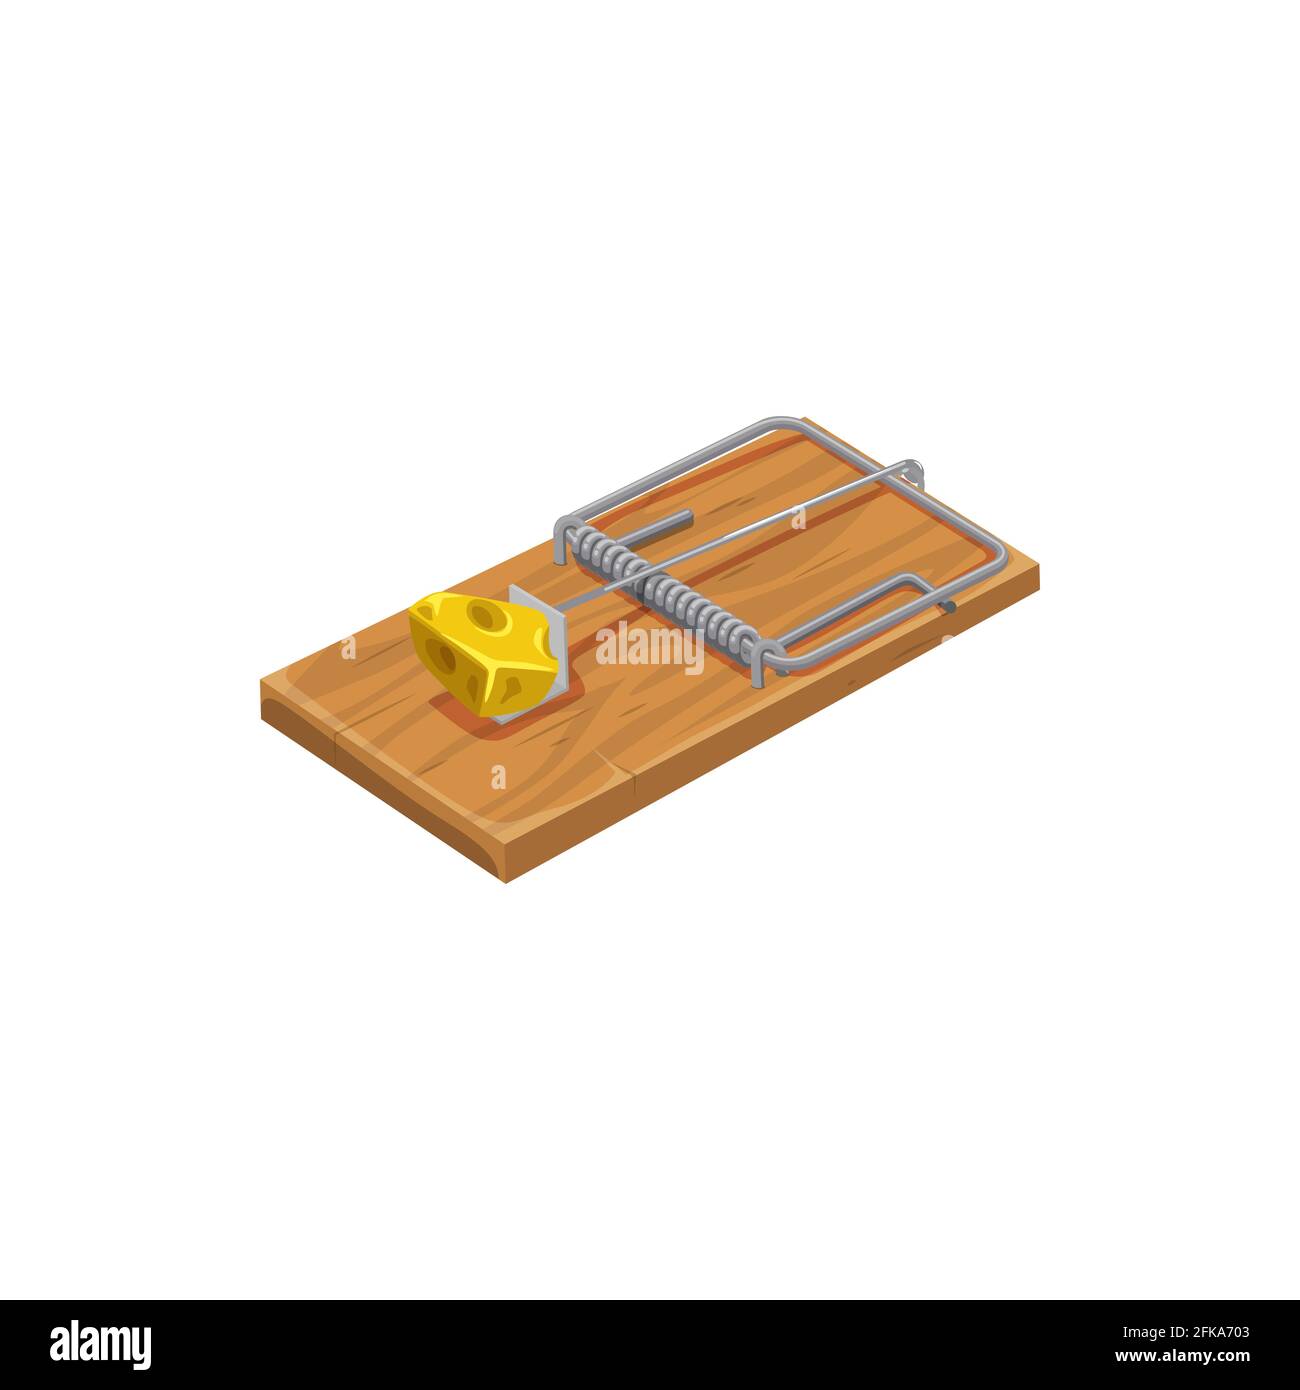 Mouse And Mousetrap Rodents Pests Trap Vector Illustration High